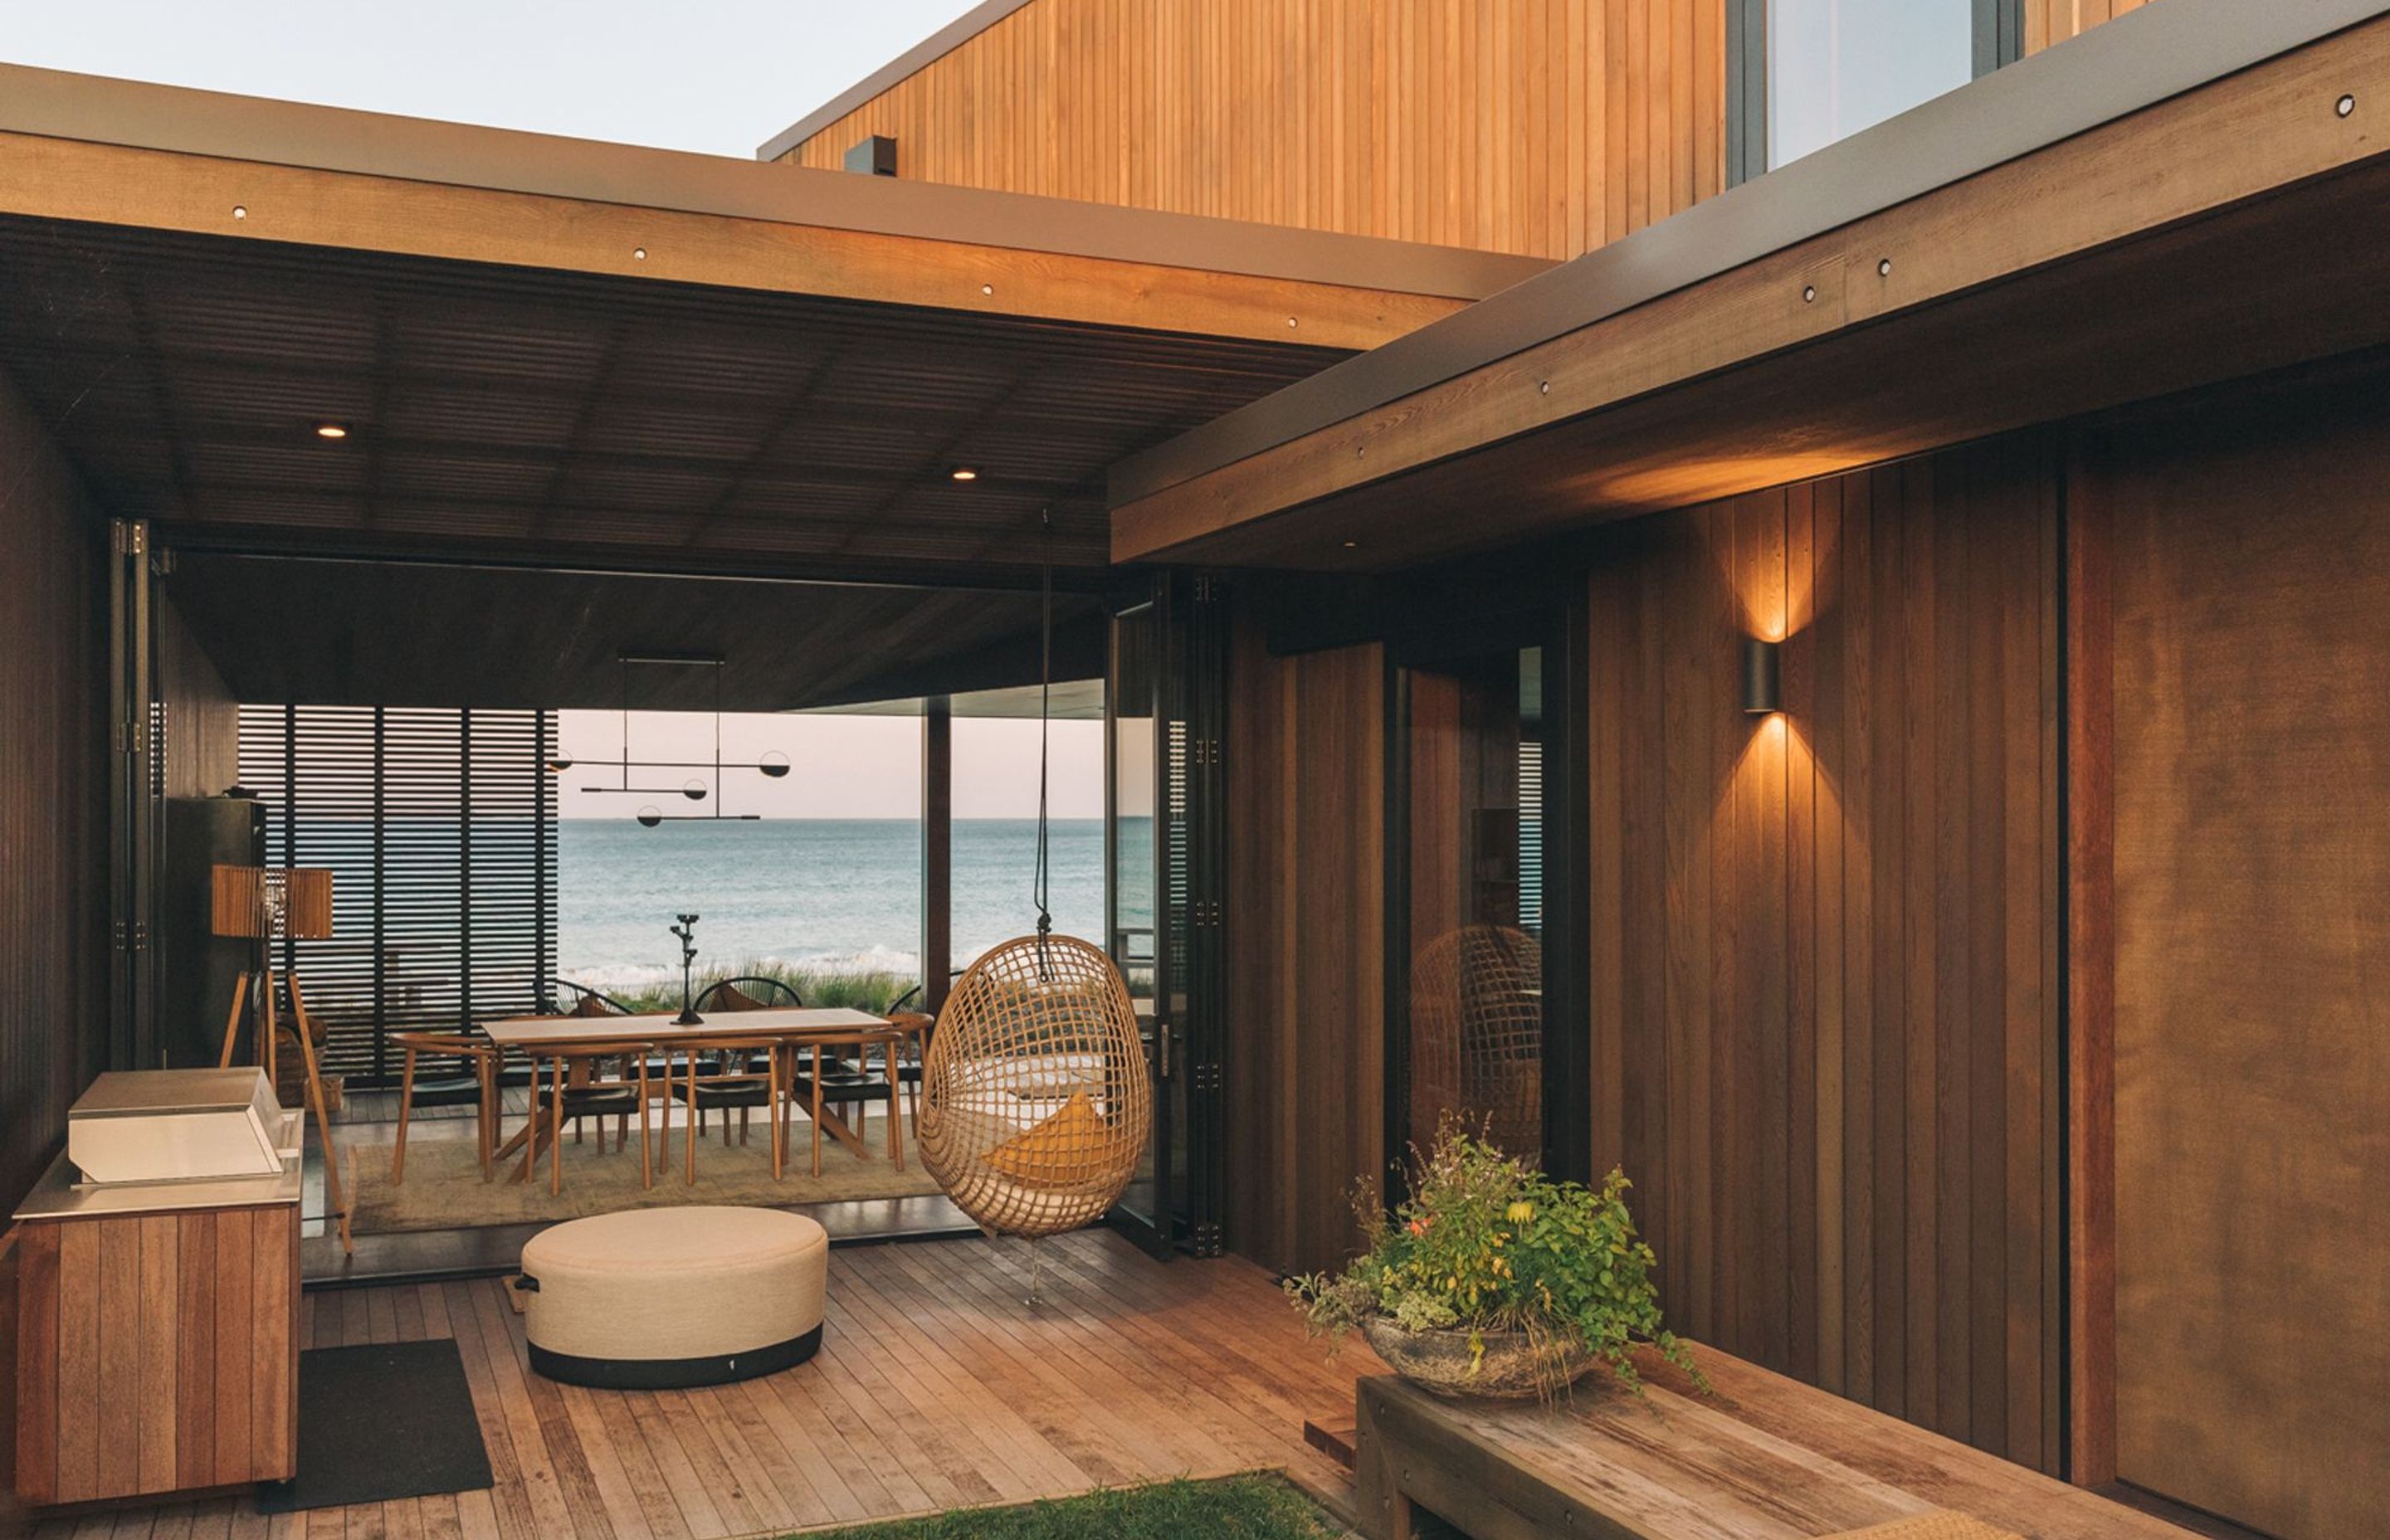 A concealed interior courtyard frames views of the ocean and provides a sheltered outdoor space for entertaining.